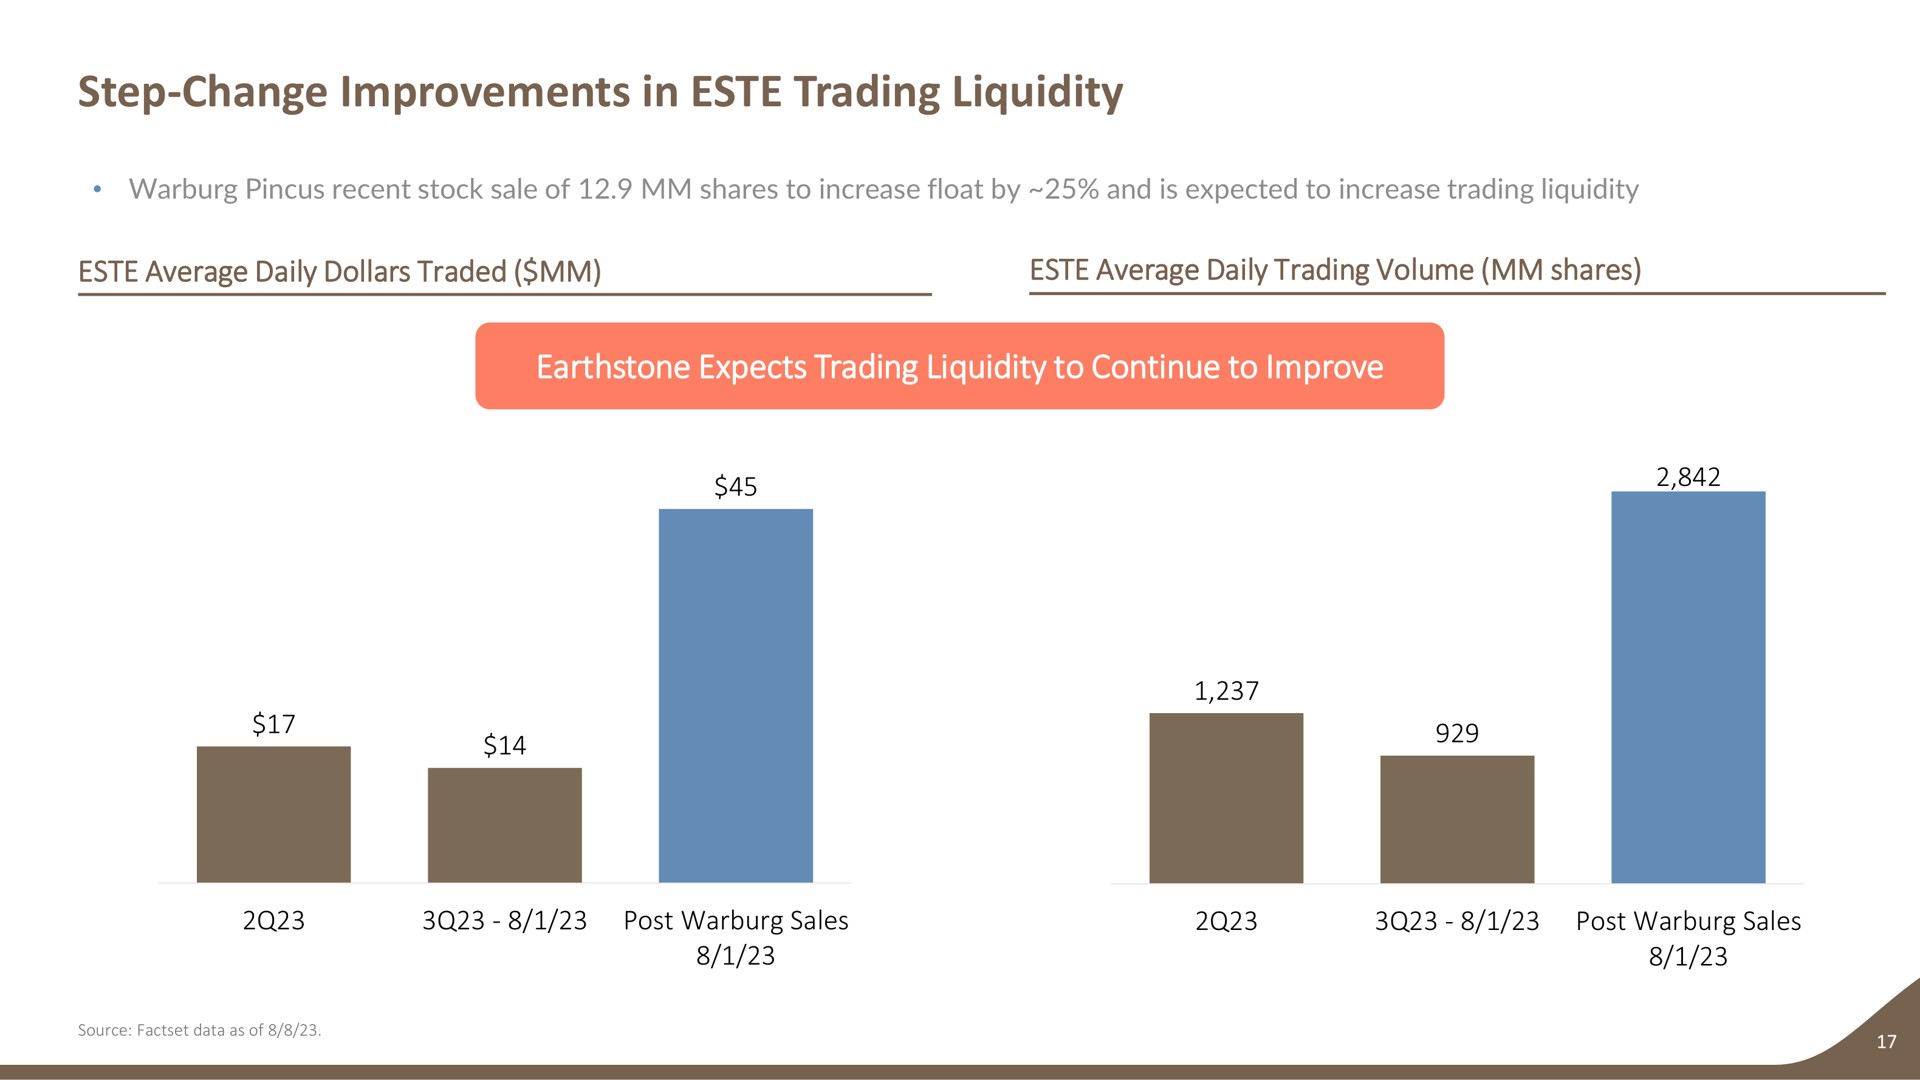 step change improvements in trading liquidity recent stock sale of shares to increase float by and is expected to increase trading liquidity average daily dollars traded average daily trading volume shares expects trading liquidity to continue to improve post sales post sales | Earthstone Energy